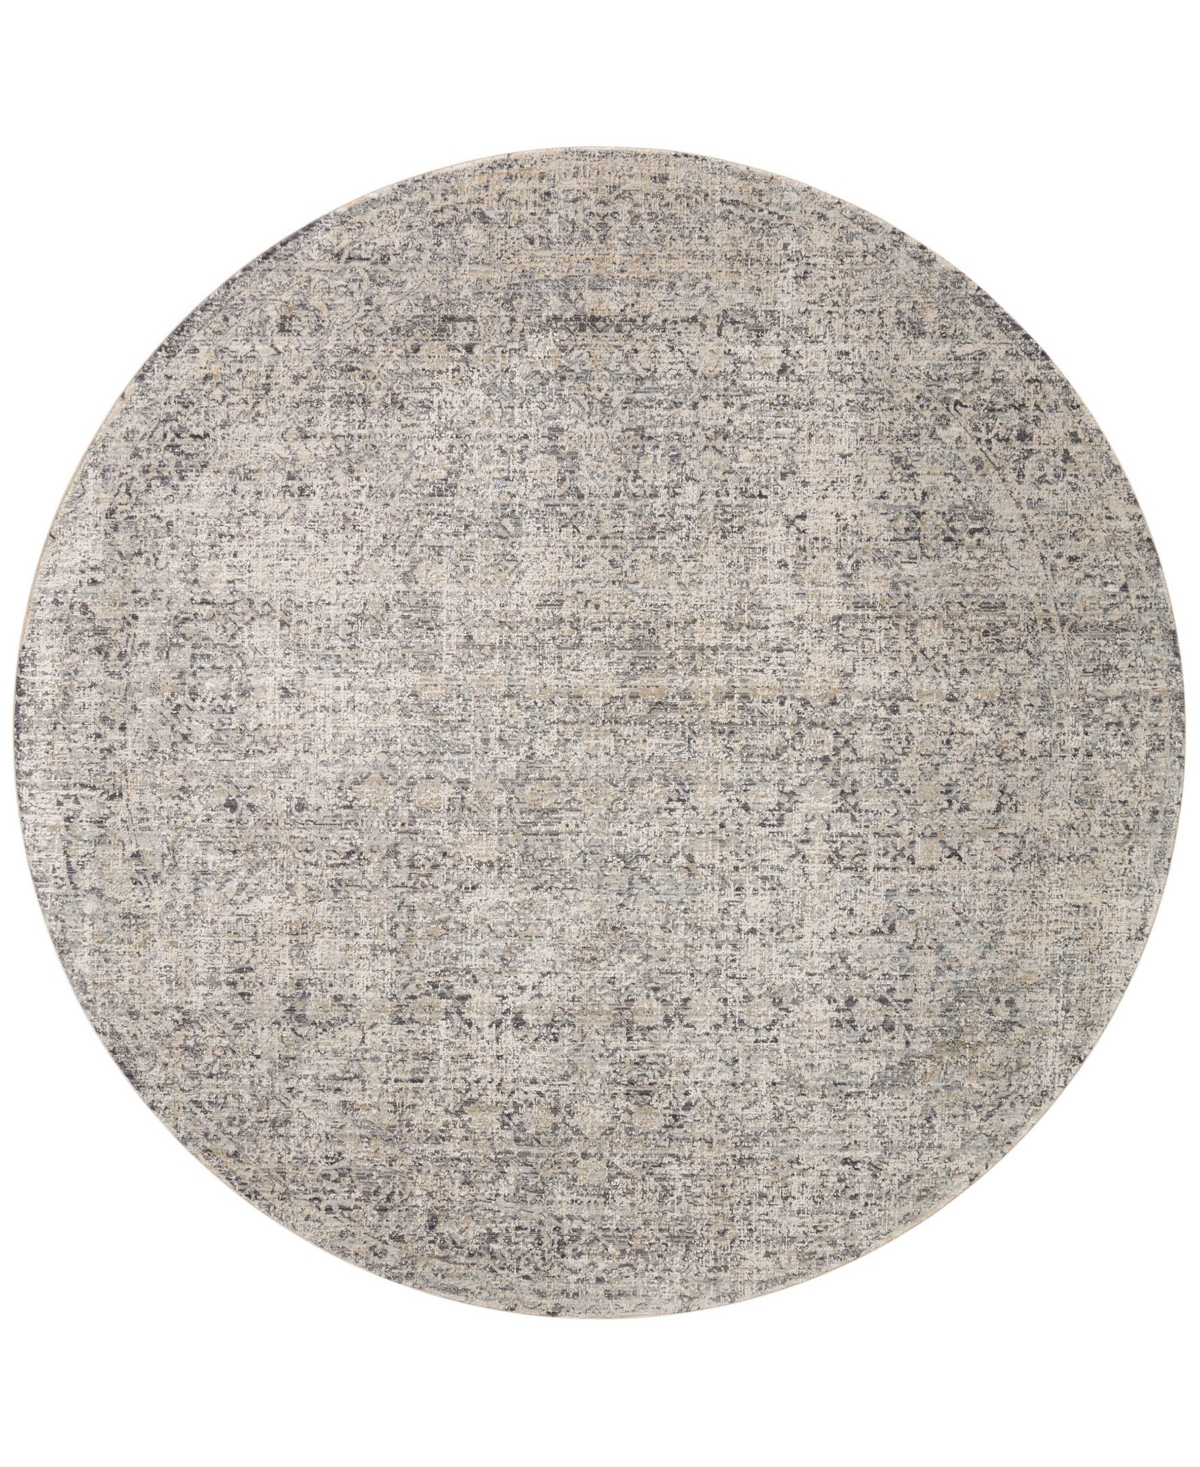 Amber Lewis X Loloi Alie Ale-01 7'10" X 7'10" Round Area Rug In Gray,mist